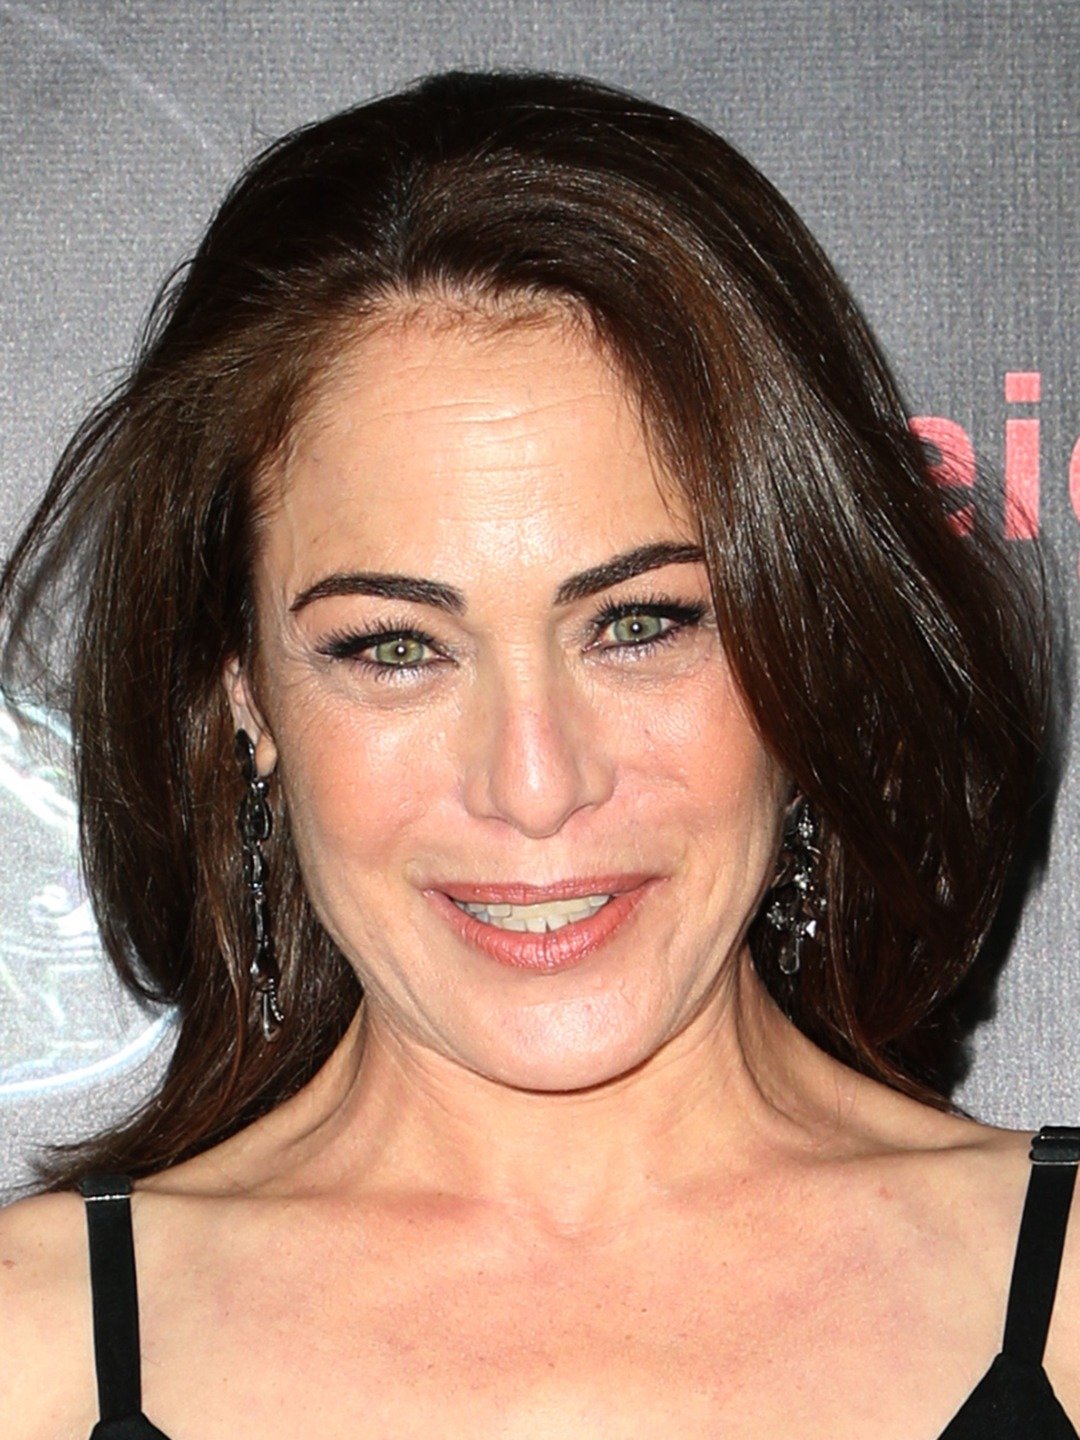 How tall is Yancy Butler?